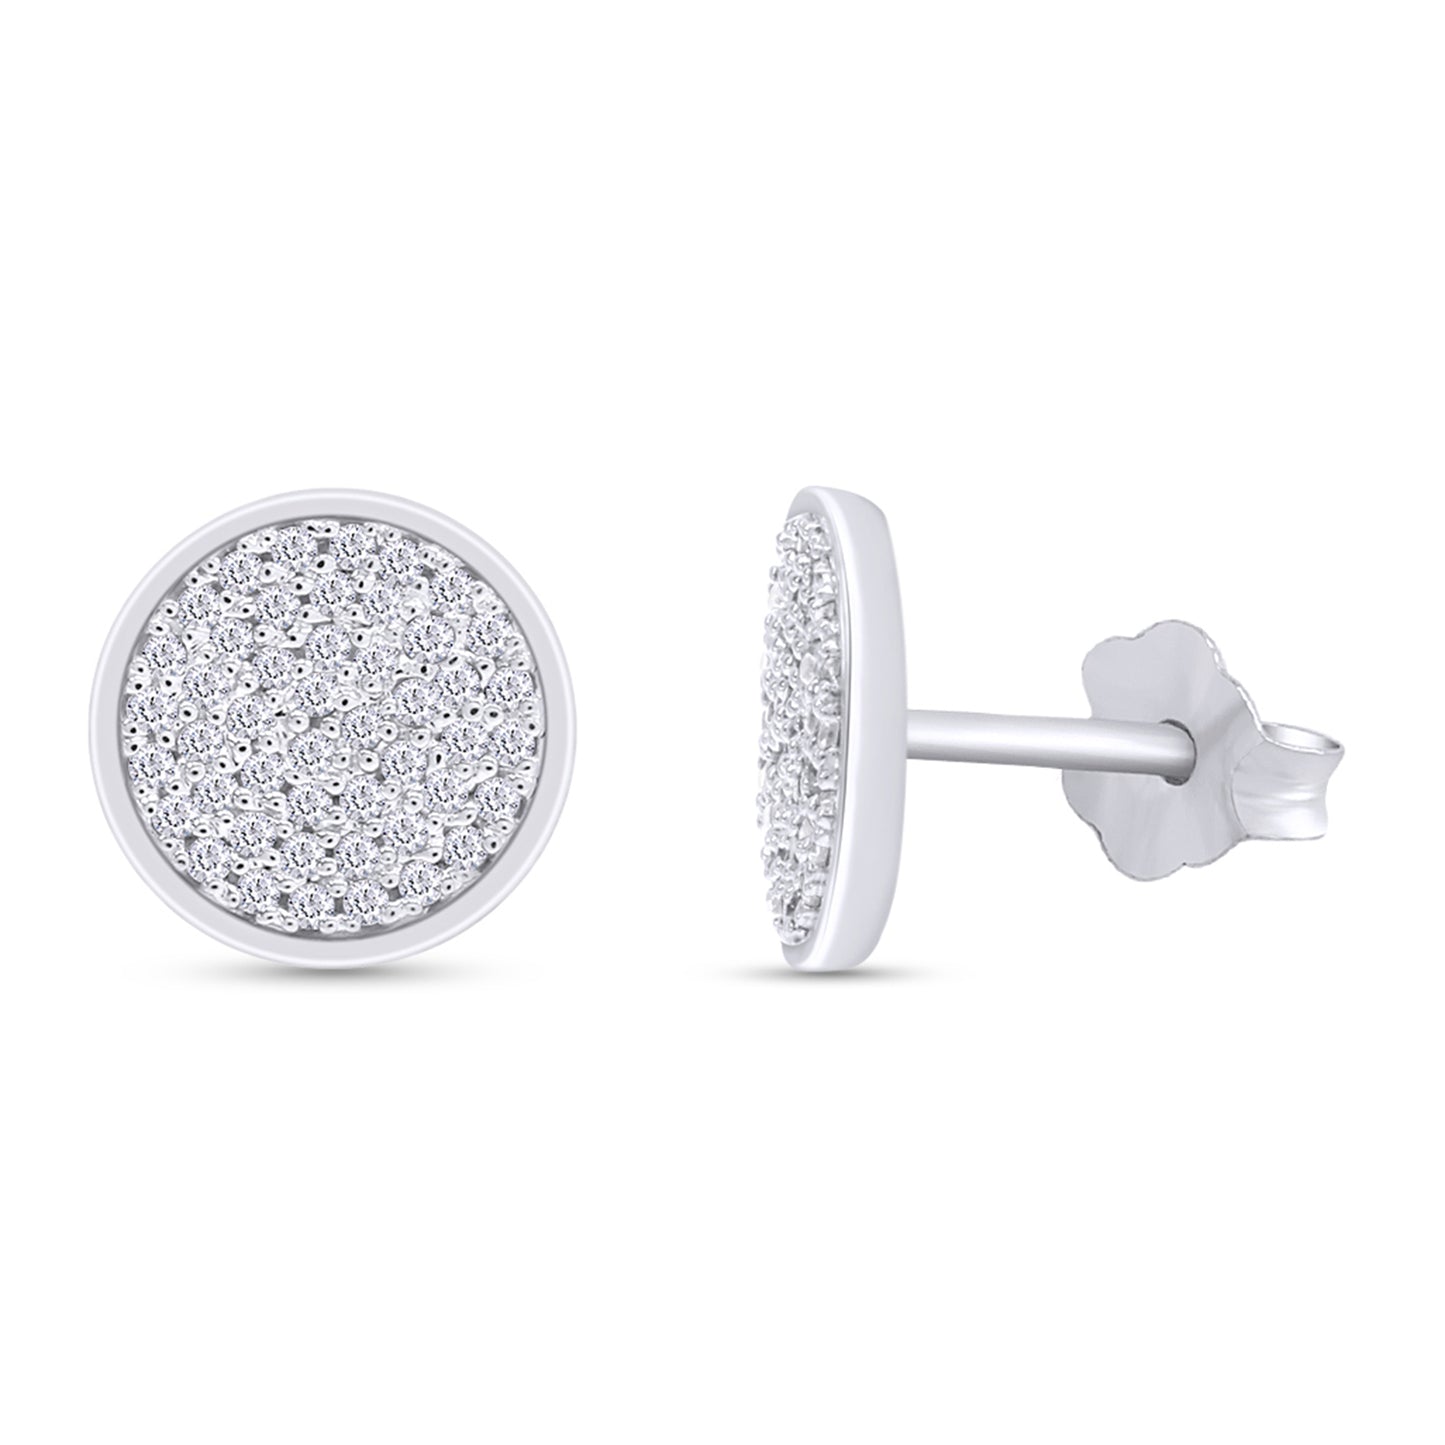 Round Cut White Cubic Zirconia Flat Disc Stud Earrings For Women In 925 Sterling Silver With Push Back